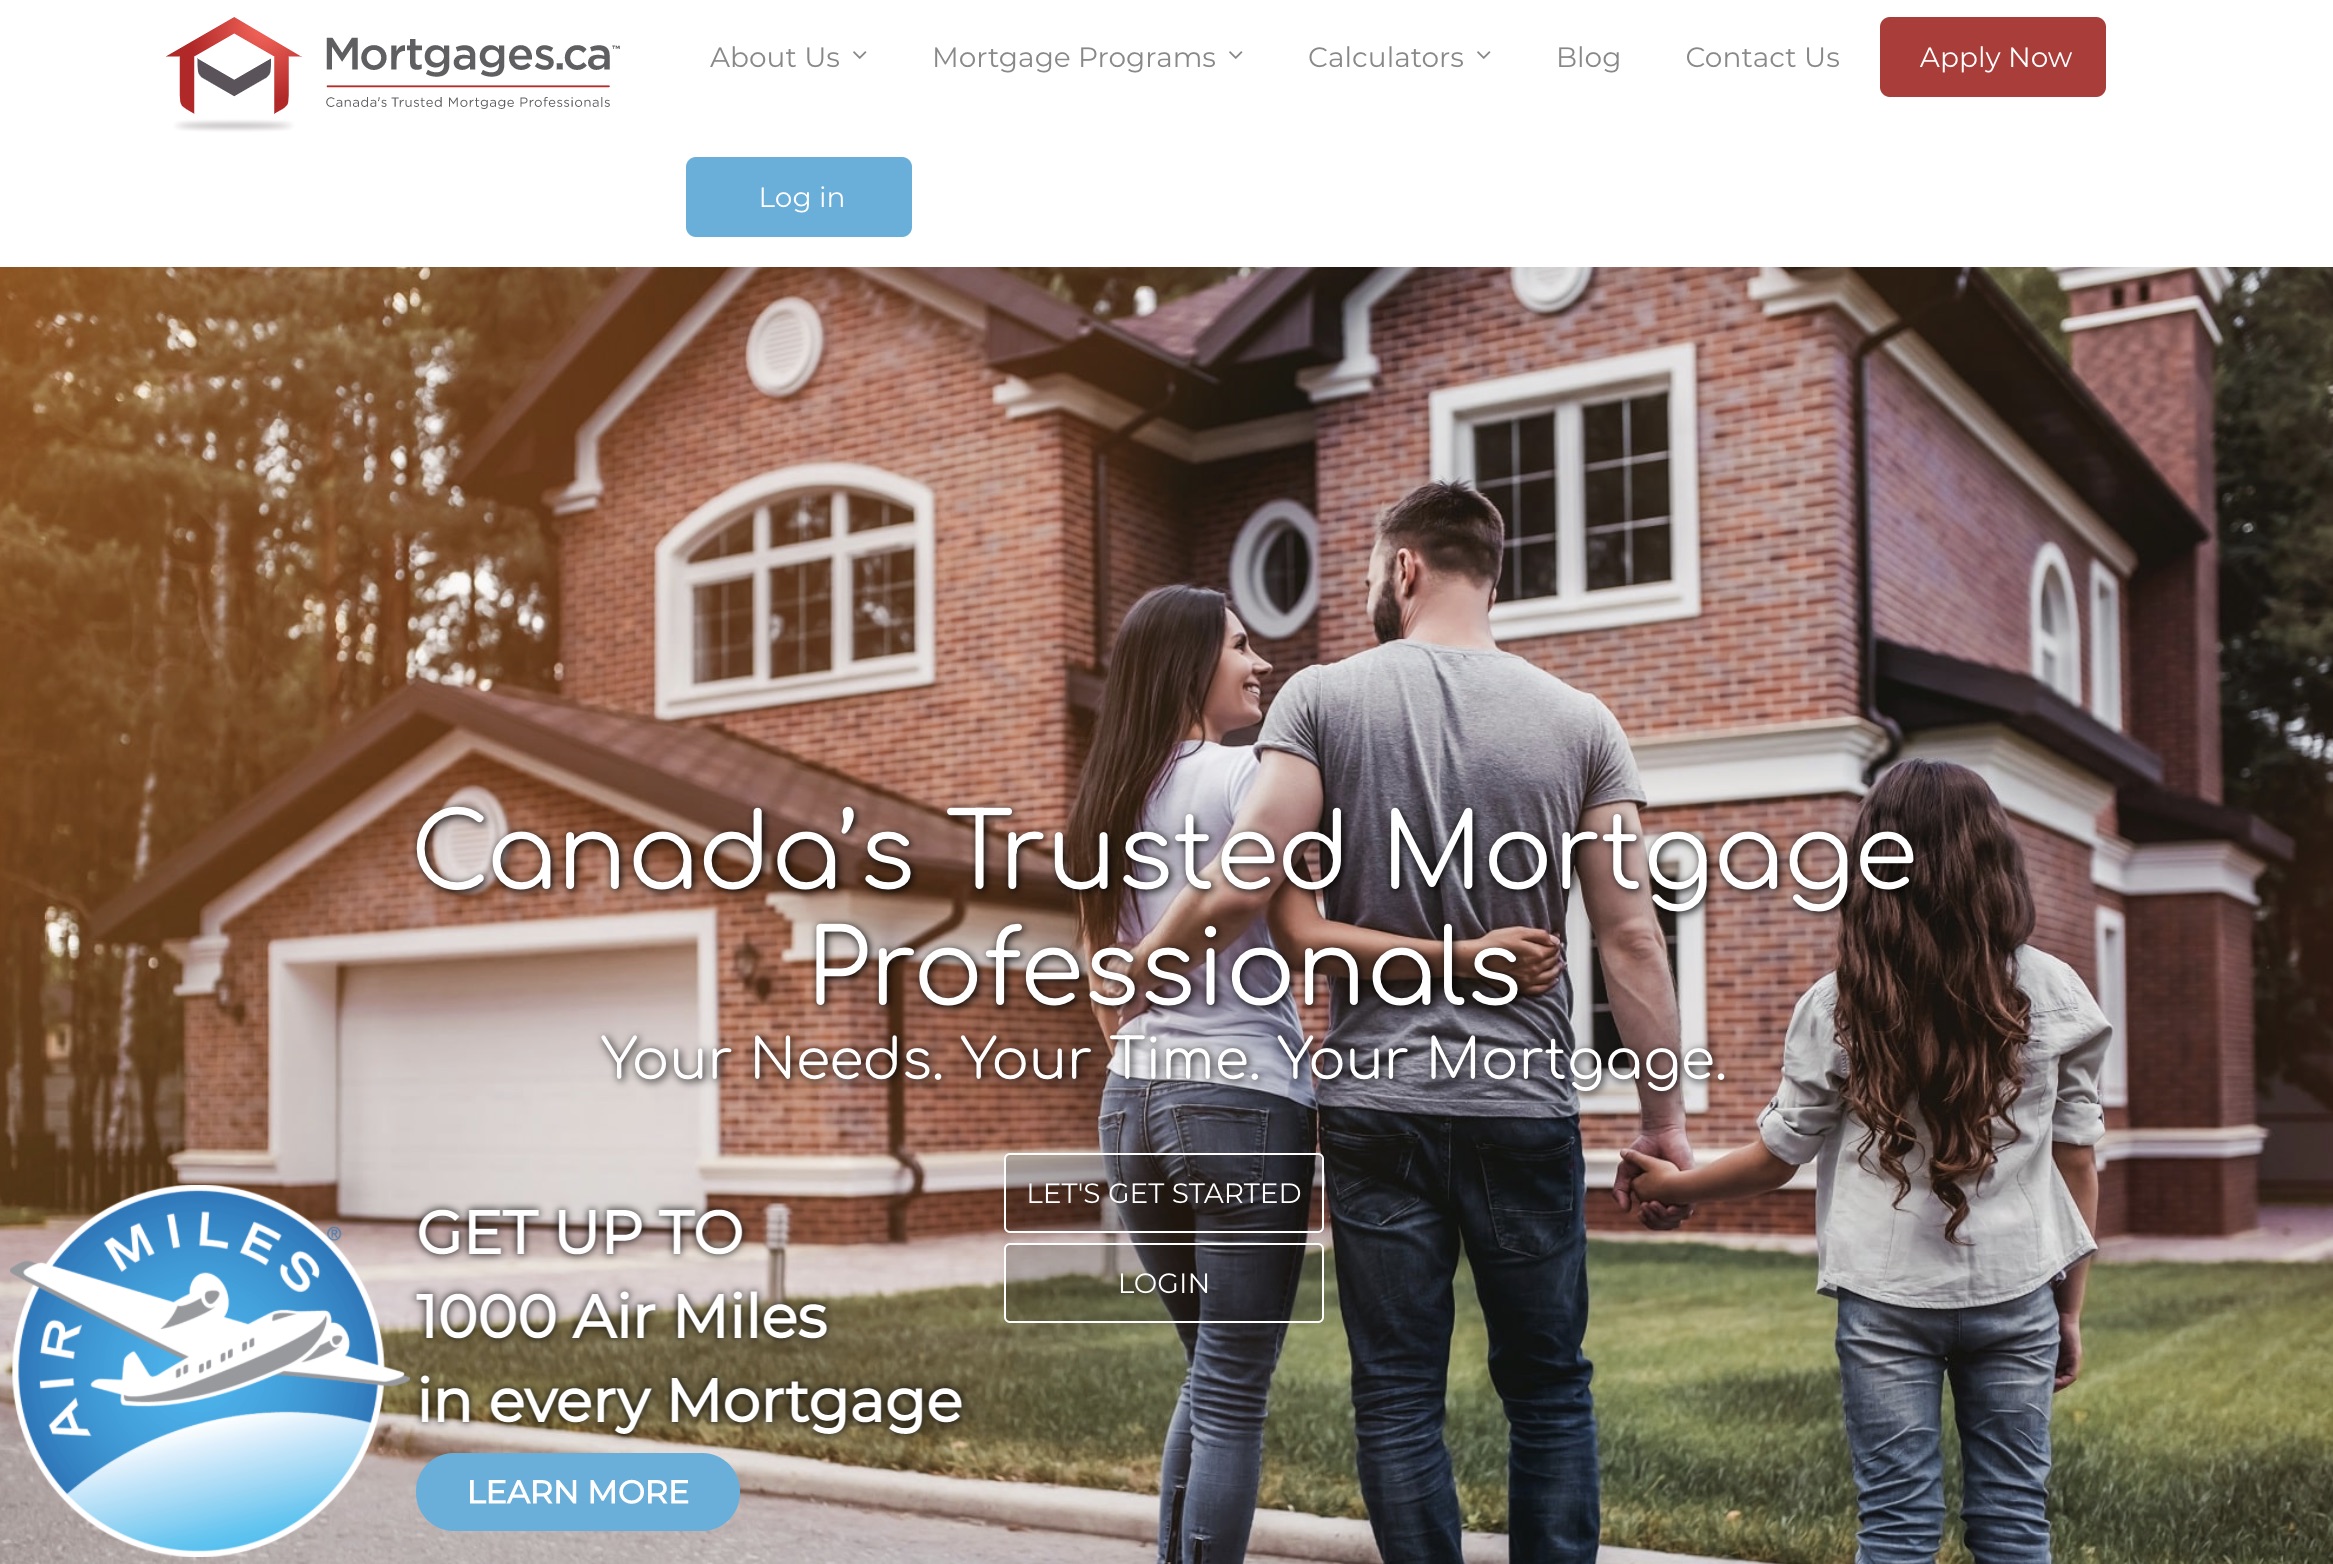 Mortgages.ca